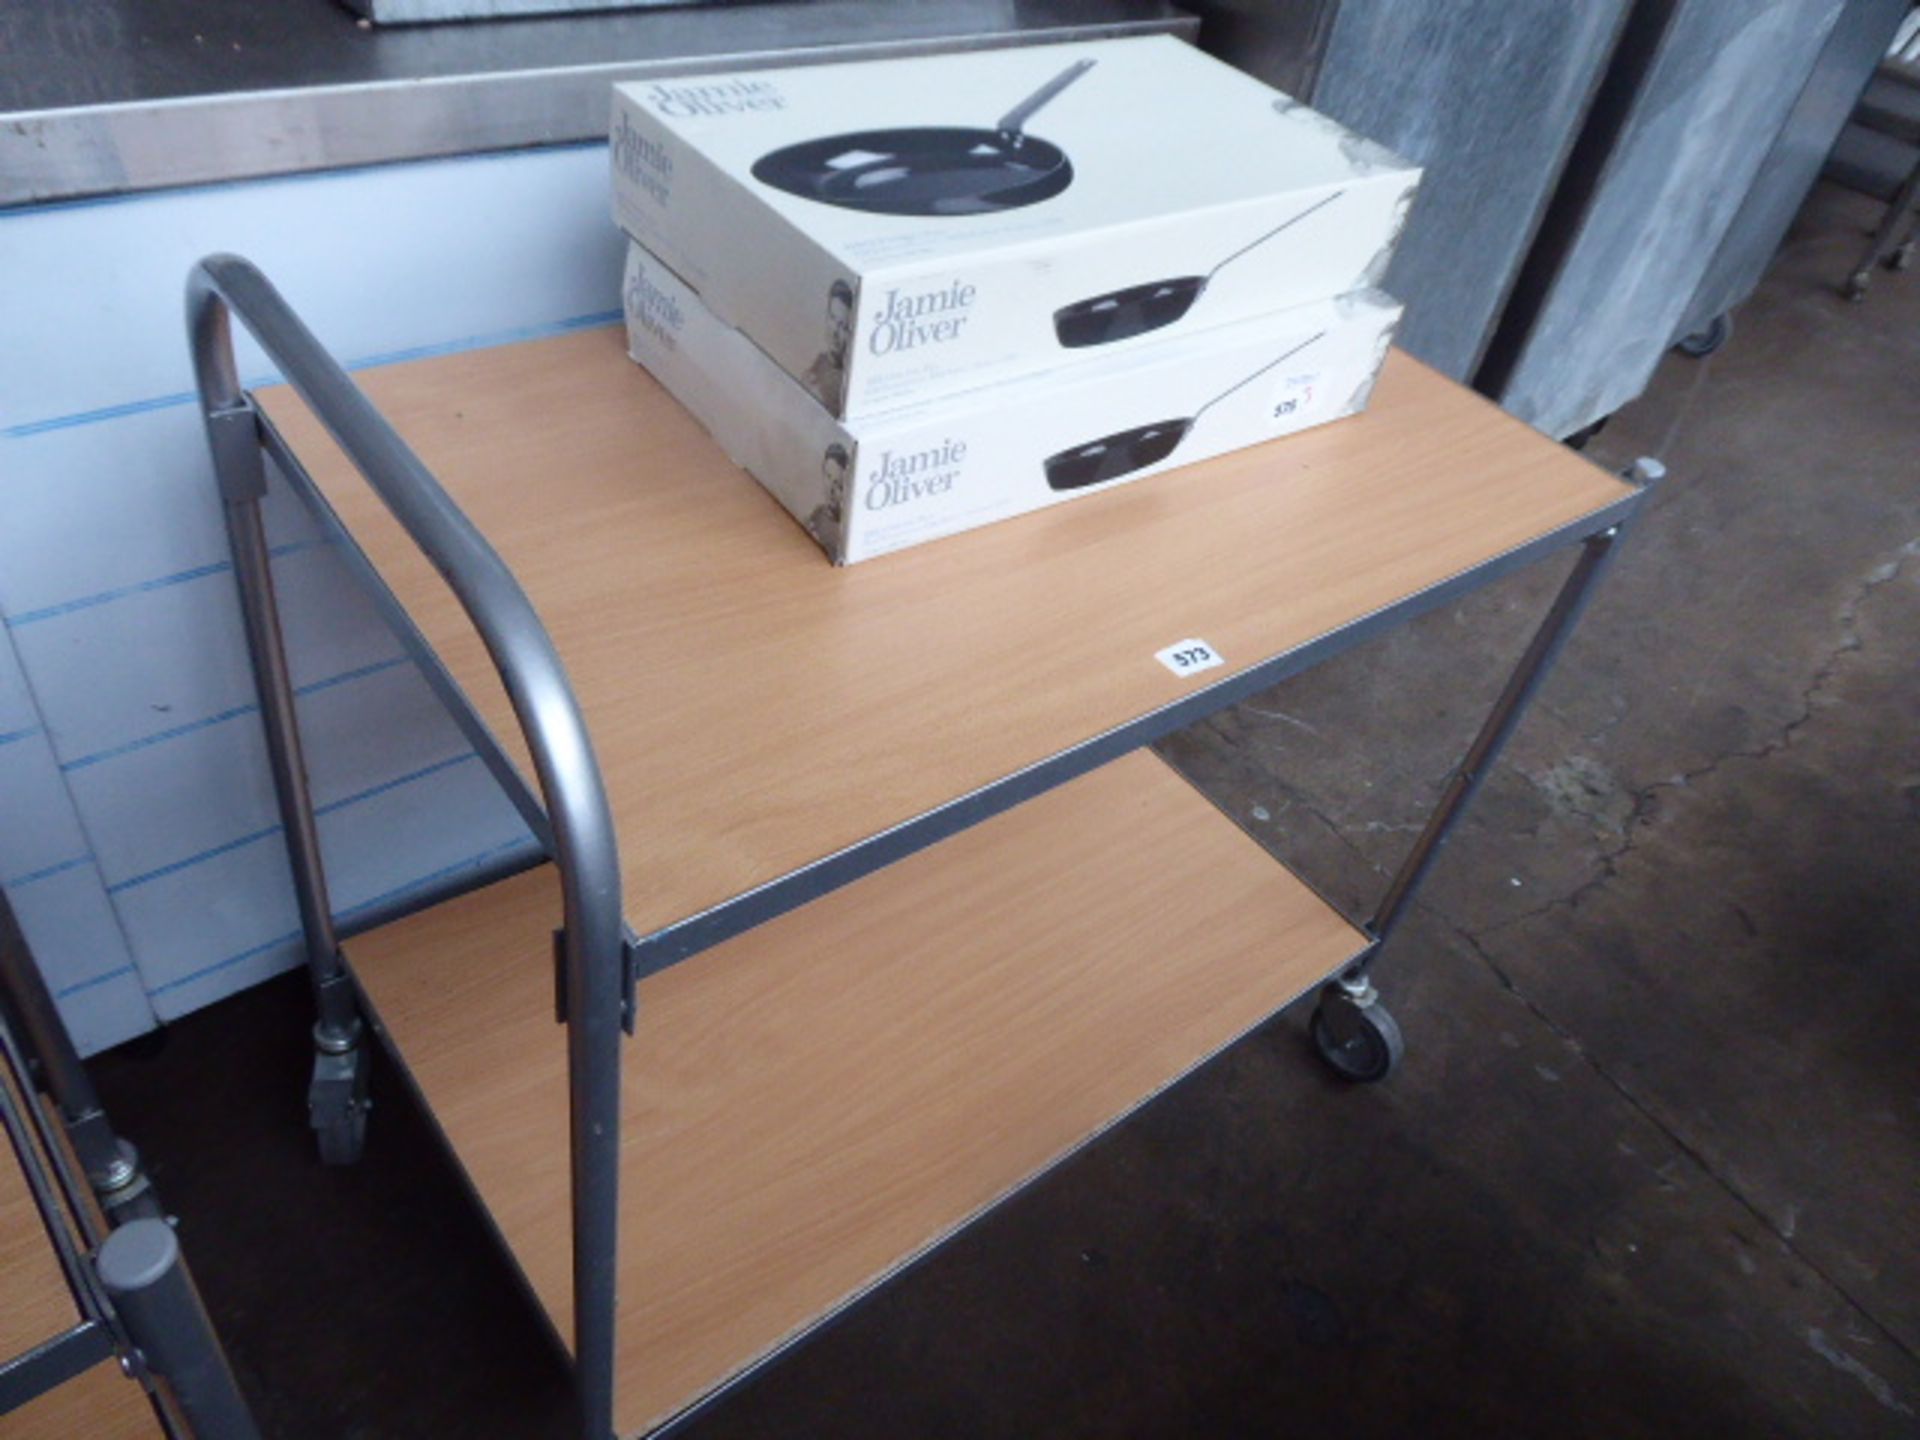 558 - 85cm 2 Tier catering trolley